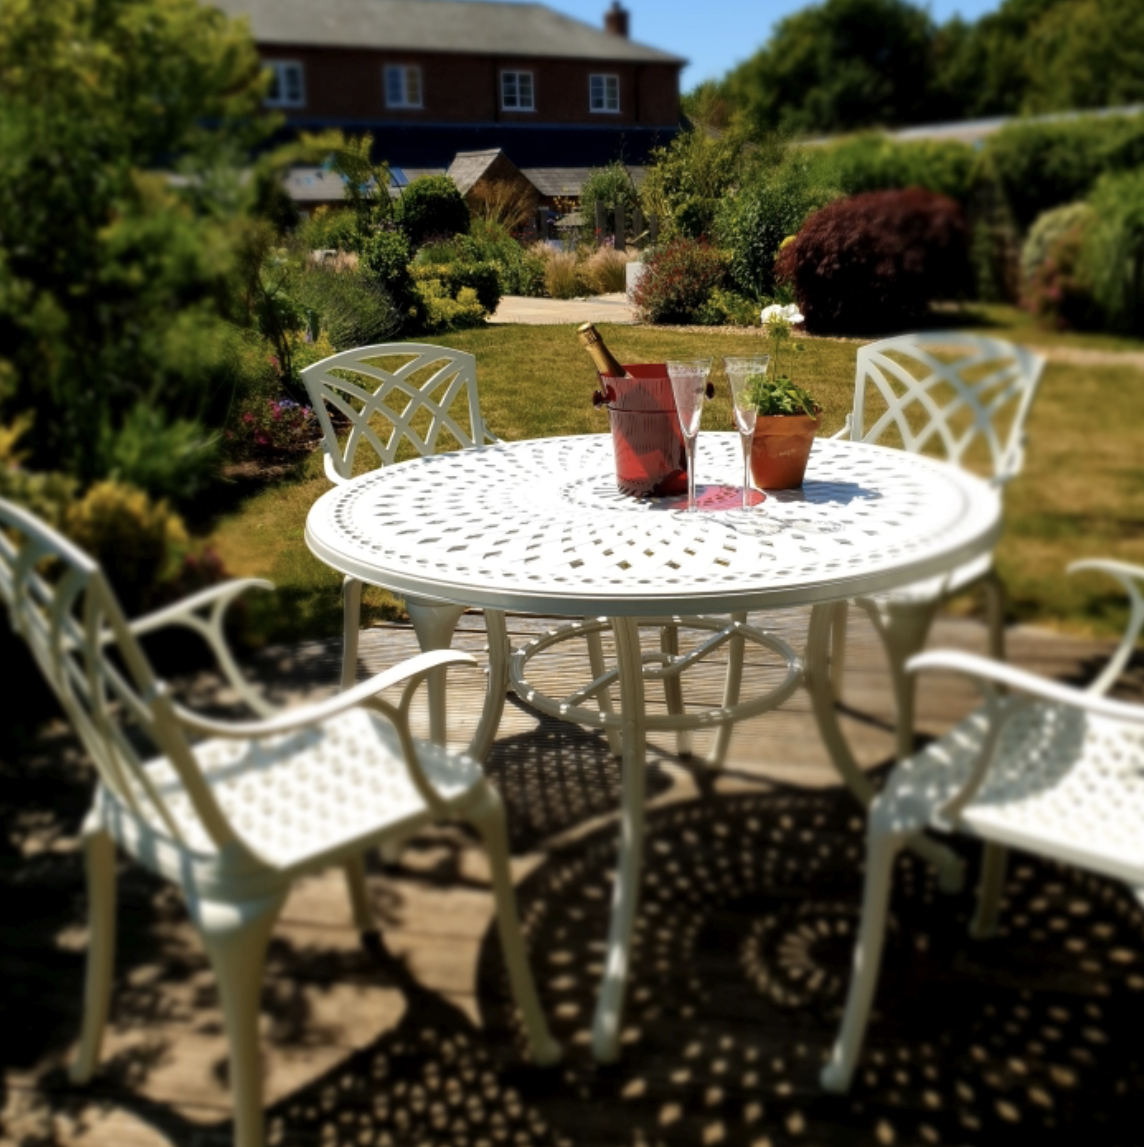 Why purchase round garden tables?